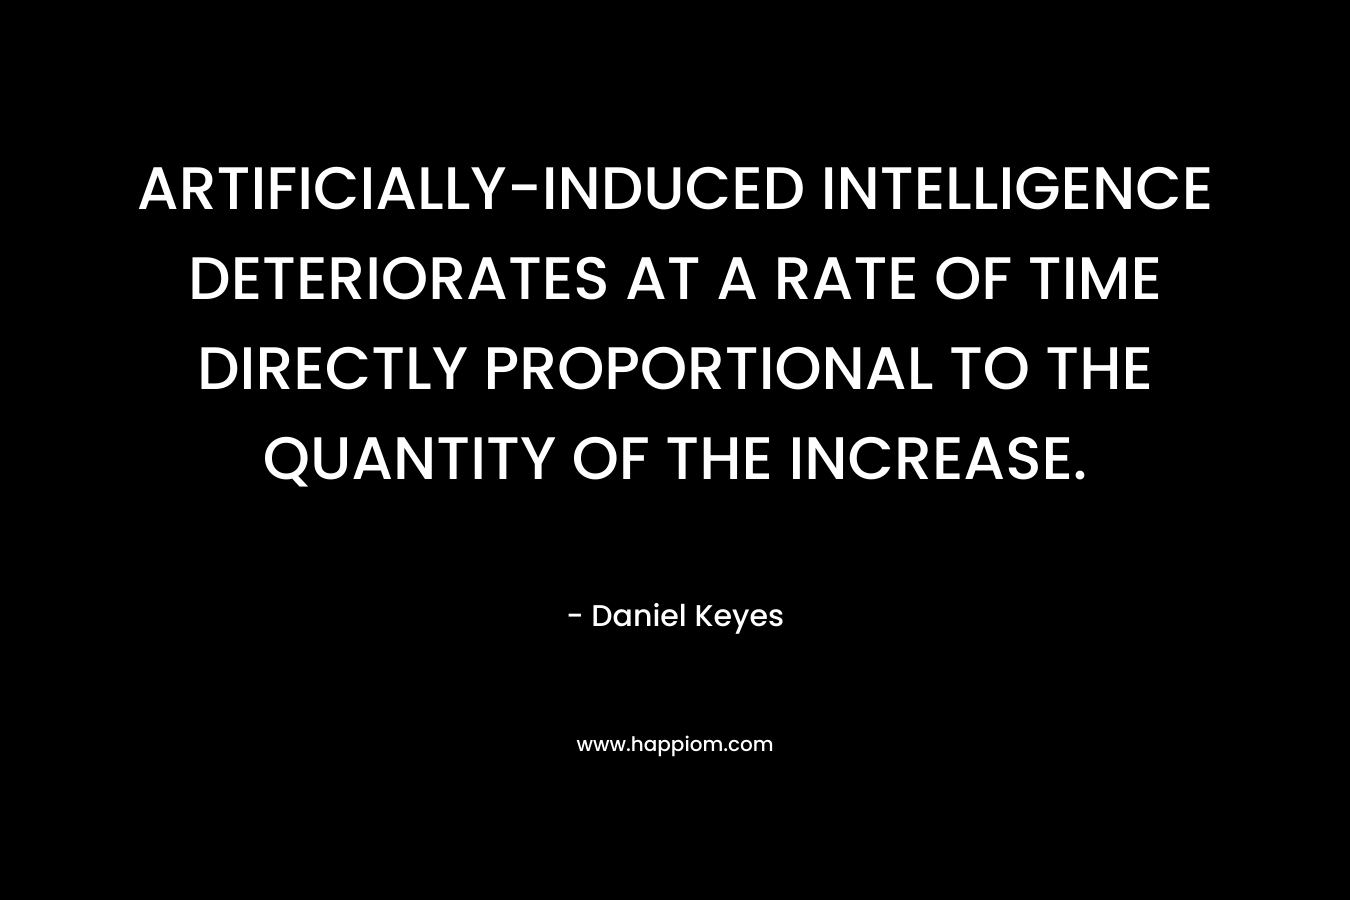 ARTIFICIALLY-INDUCED INTELLIGENCE DETERIORATES AT A RATE OF TIME DIRECTLY PROPORTIONAL TO THE QUANTITY OF THE INCREASE. – Daniel Keyes